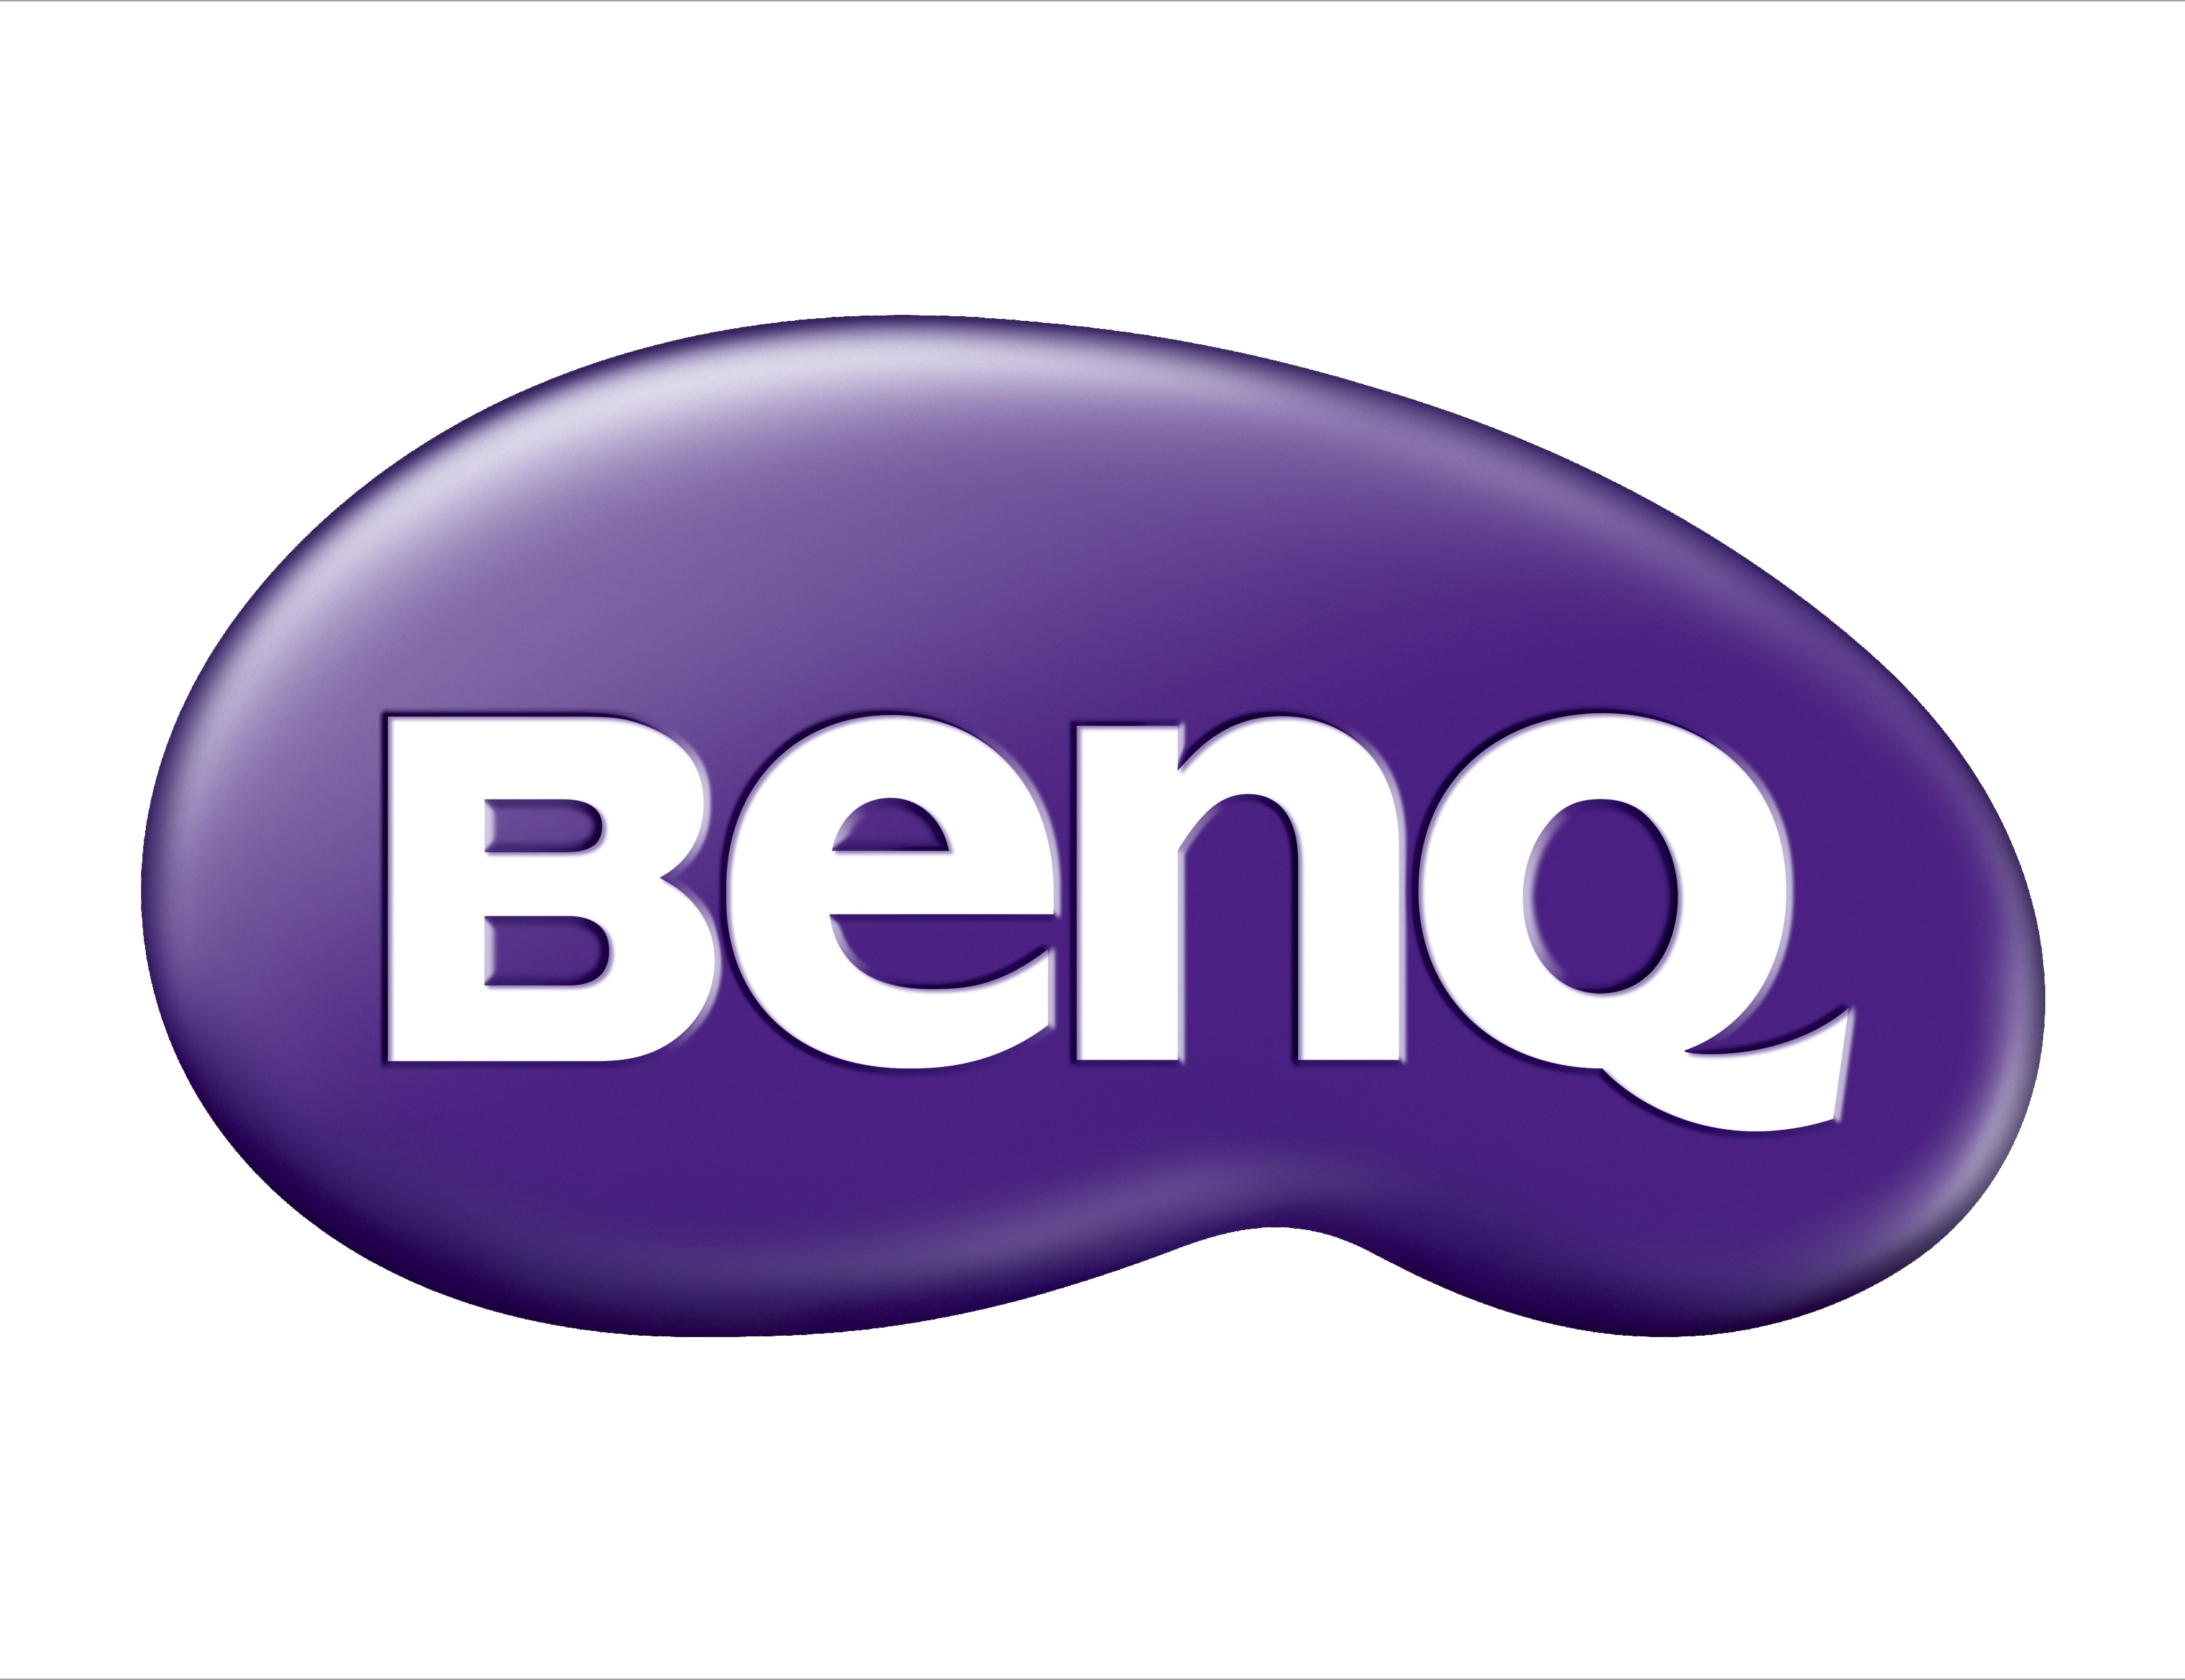 Working from Home just got Easier, Healthier, And More Productive with BenQ’s Smart Office Solutions